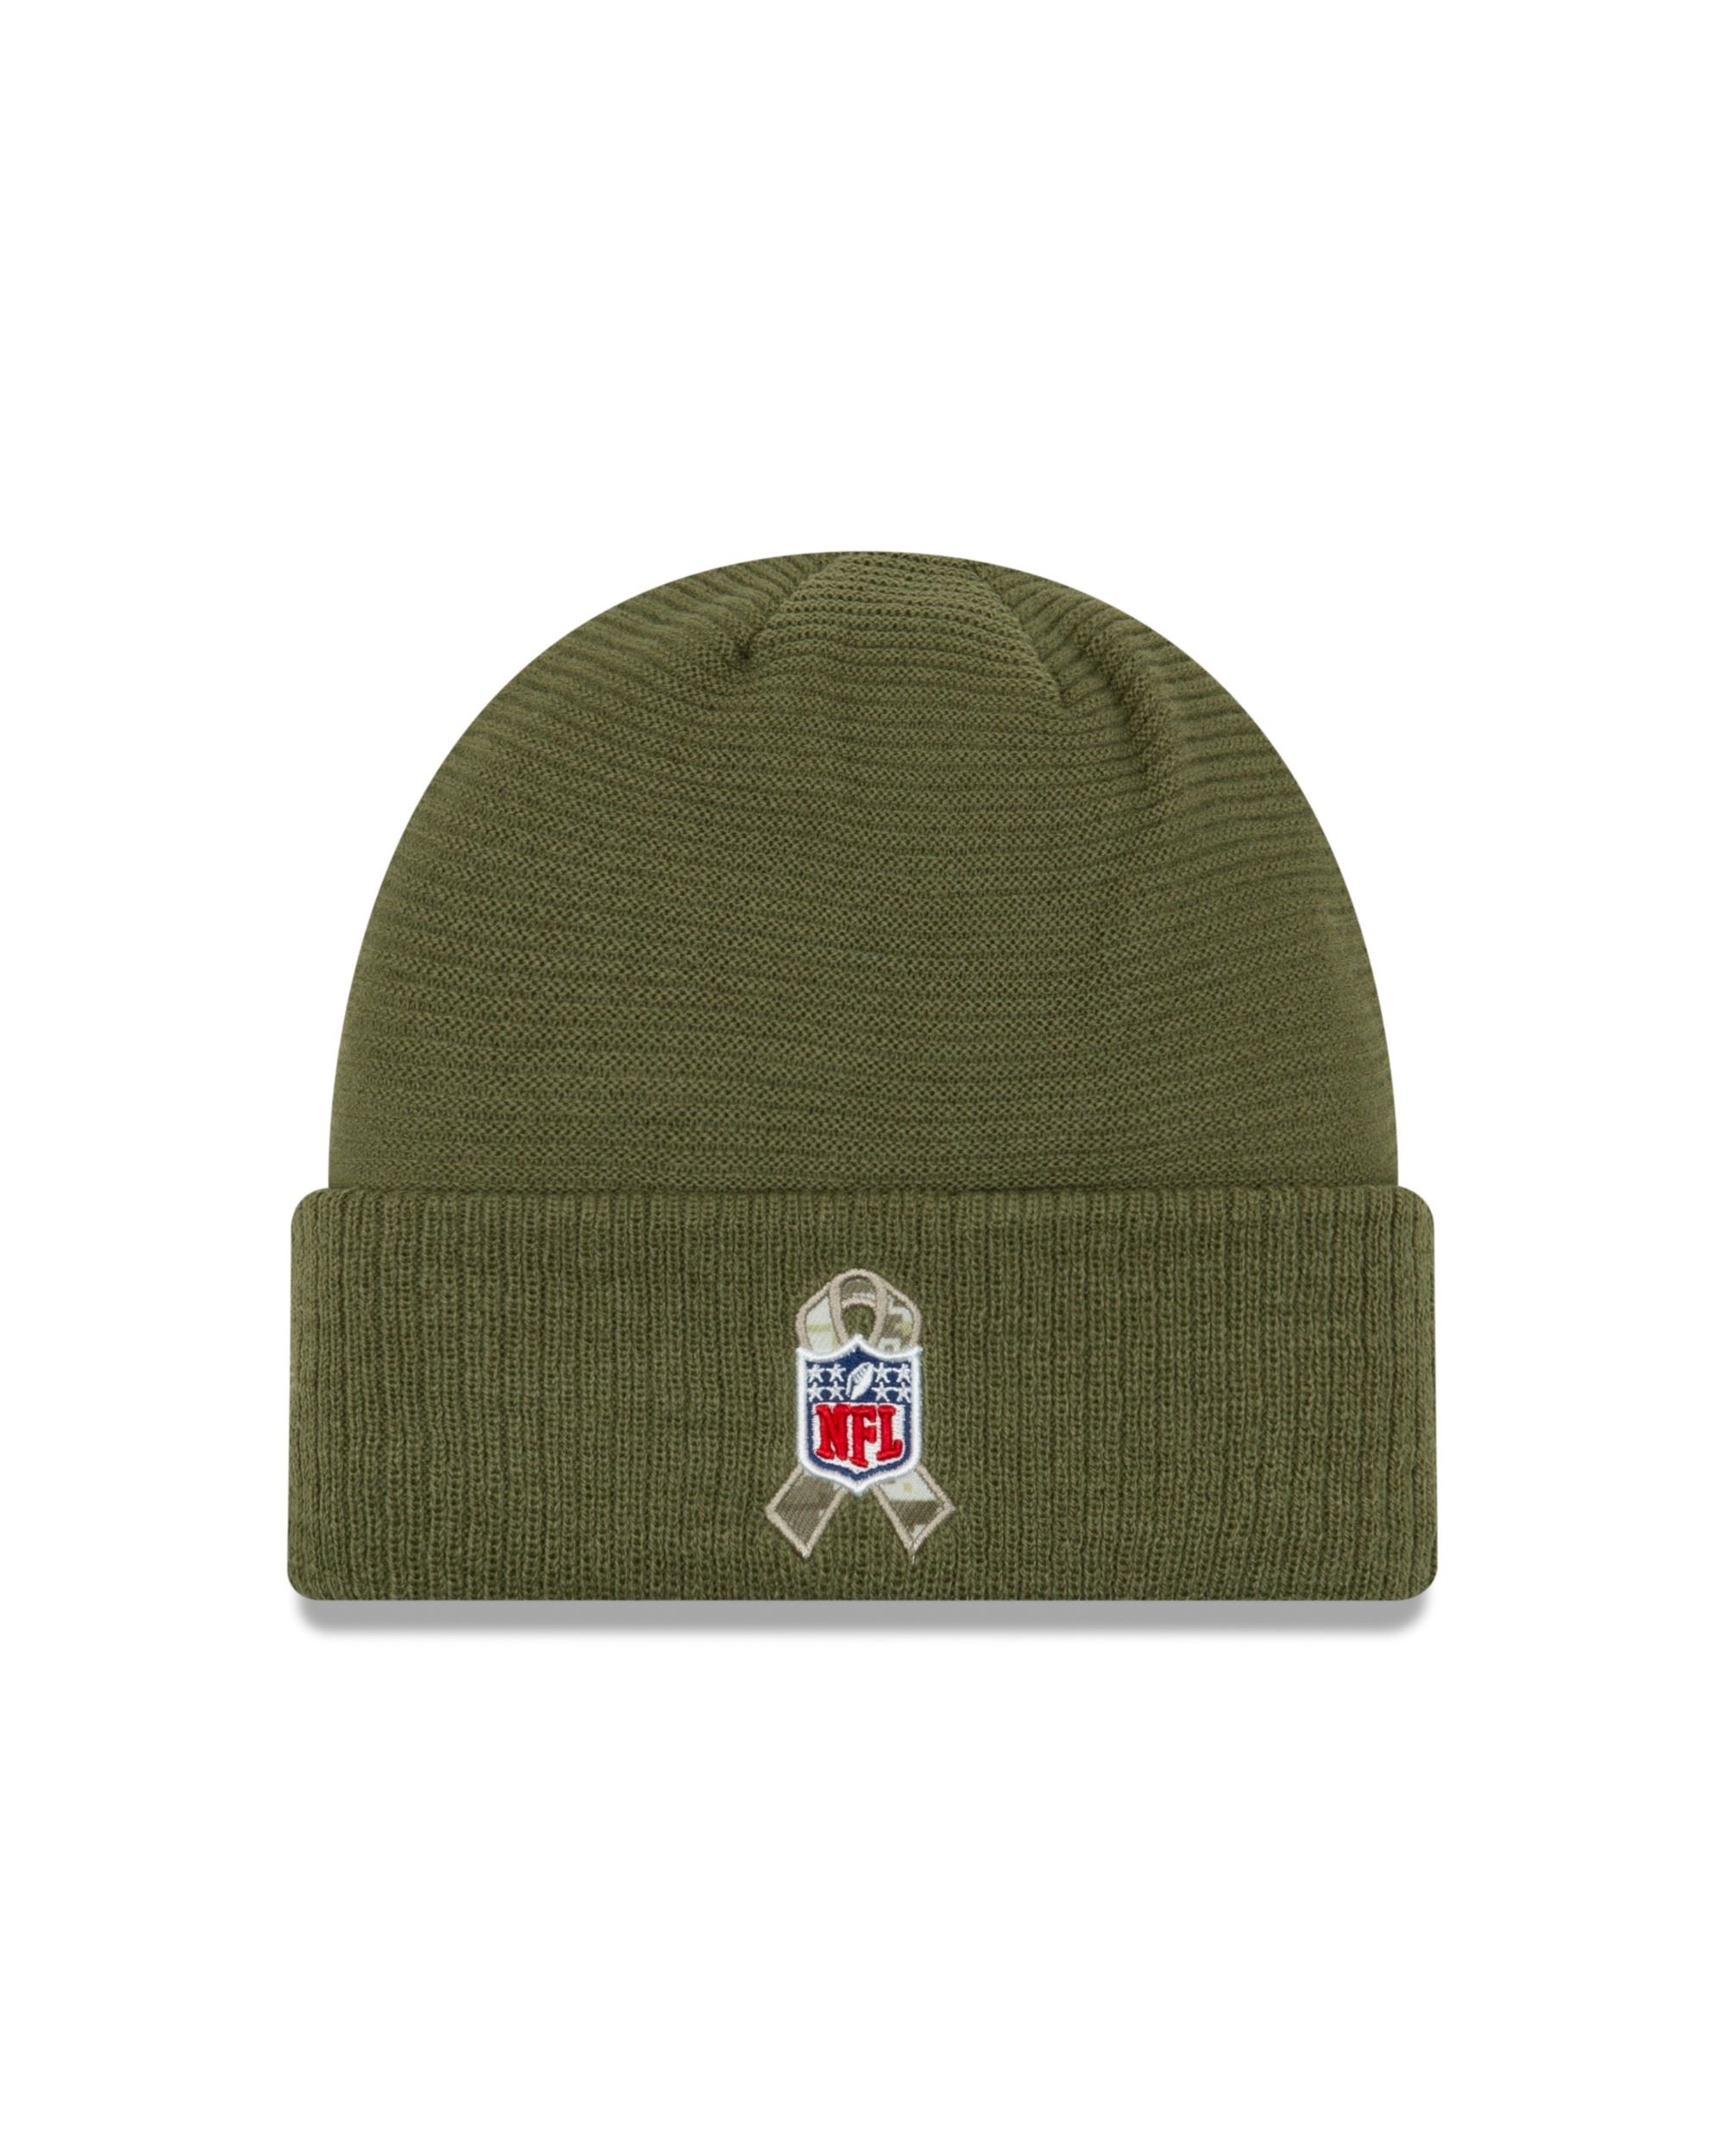 Los Angeles Rams On Field 2019 Salute to Service Beanie Olive New Era